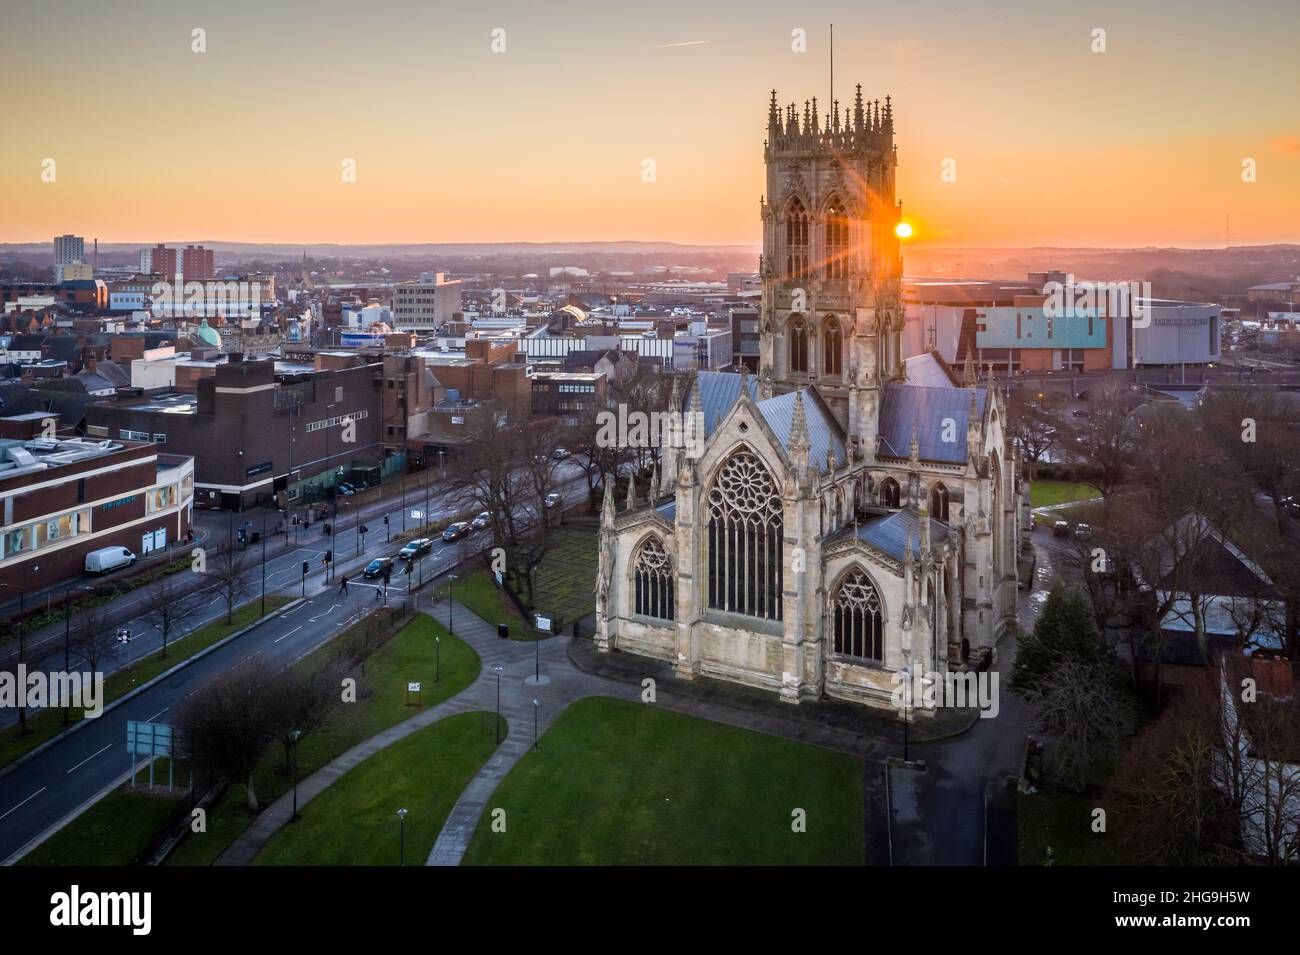 An aerial view of St George's church or Doncaster Minster at sunset Stock Photo